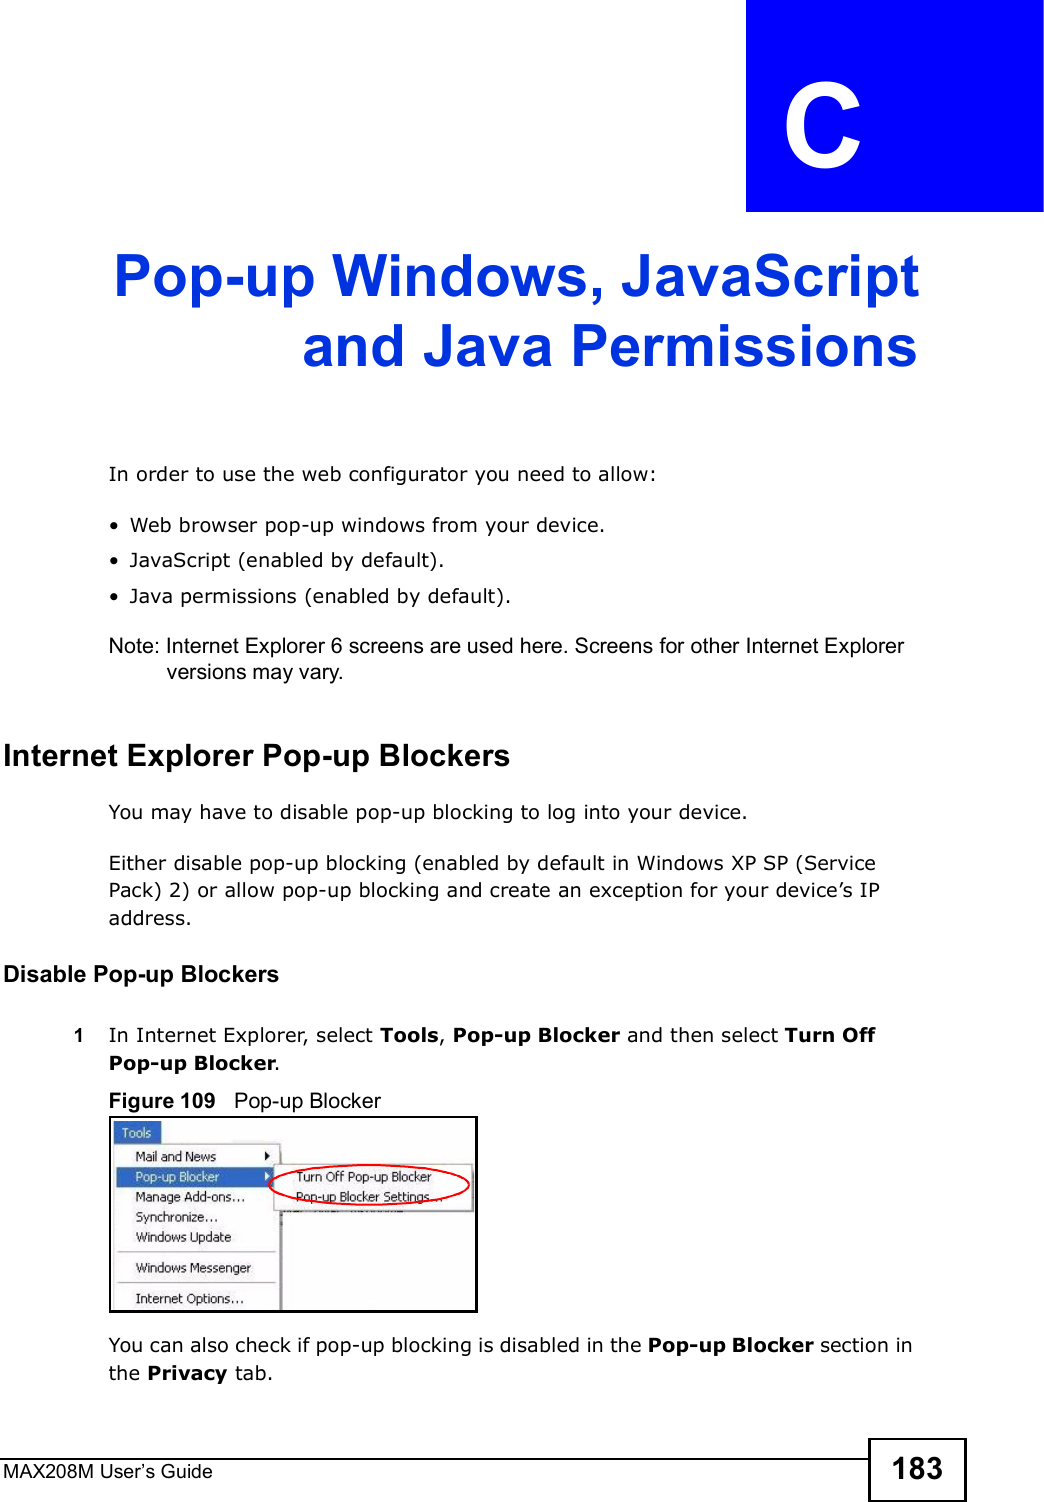 MAX208M User s Guide 183APPENDIX  C Pop-up Windows, JavaScriptand Java PermissionsIn order to use the web configurator you need to allow:!Web browser pop-up windows from your device.!JavaScript (enabled by default).!Java permissions (enabled by default).Note: Internet Explorer 6 screens are used here. Screens for other Internet Explorer versions may vary.Internet Explorer Pop-up BlockersYou may have to disable pop-up blocking to log into your device. Either disable pop-up blocking (enabled by default in Windows XP SP (Service Pack) 2) or allow pop-up blocking and create an exception for your device s IP address.Disable Pop-up Blockers1In Internet Explorer, select Tools, Pop-up Blocker and then select Turn Off Pop-up Blocker. Figure 109   Pop-up BlockerYou can also check if pop-up blocking is disabled in the Pop-up Blocker section in the Privacy tab. 